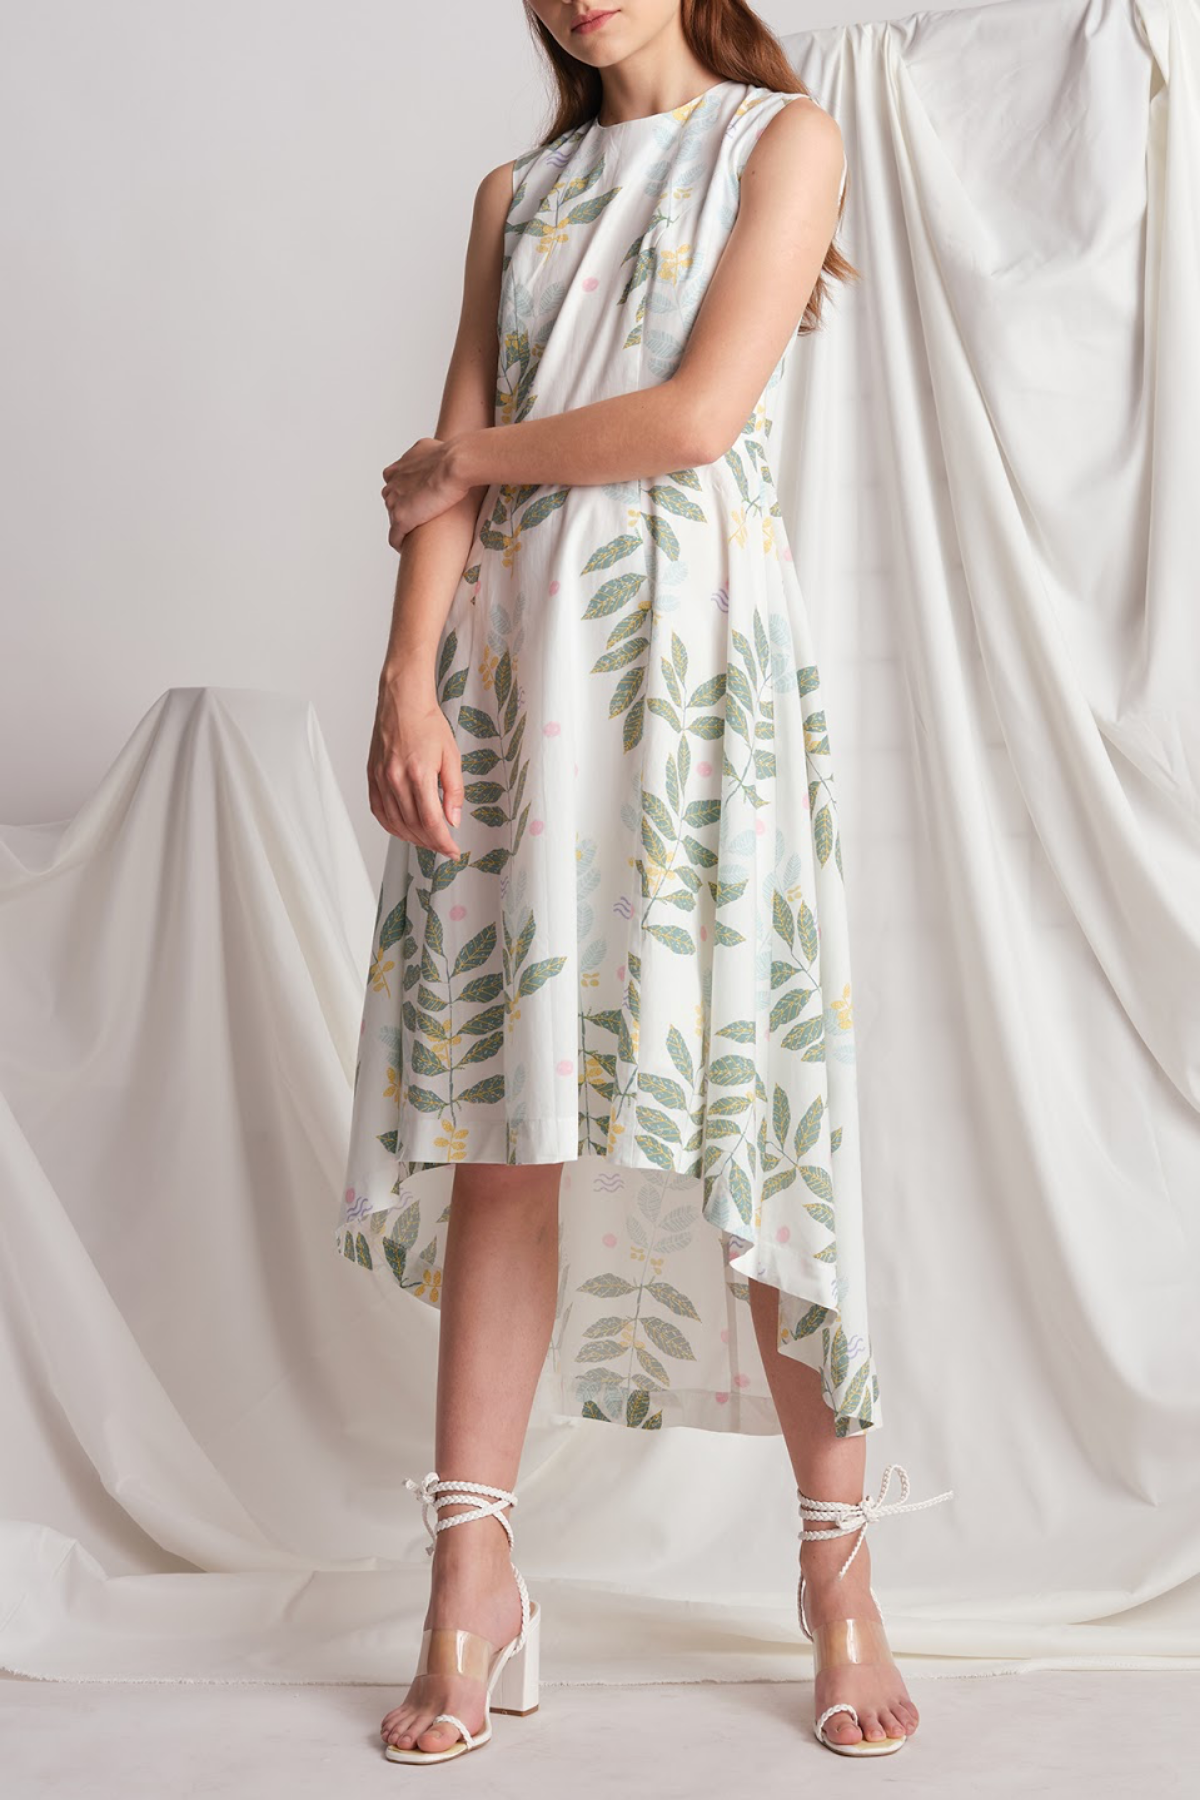 Lily & Lou Alicia Dress in Leafy, available in ZERRIN